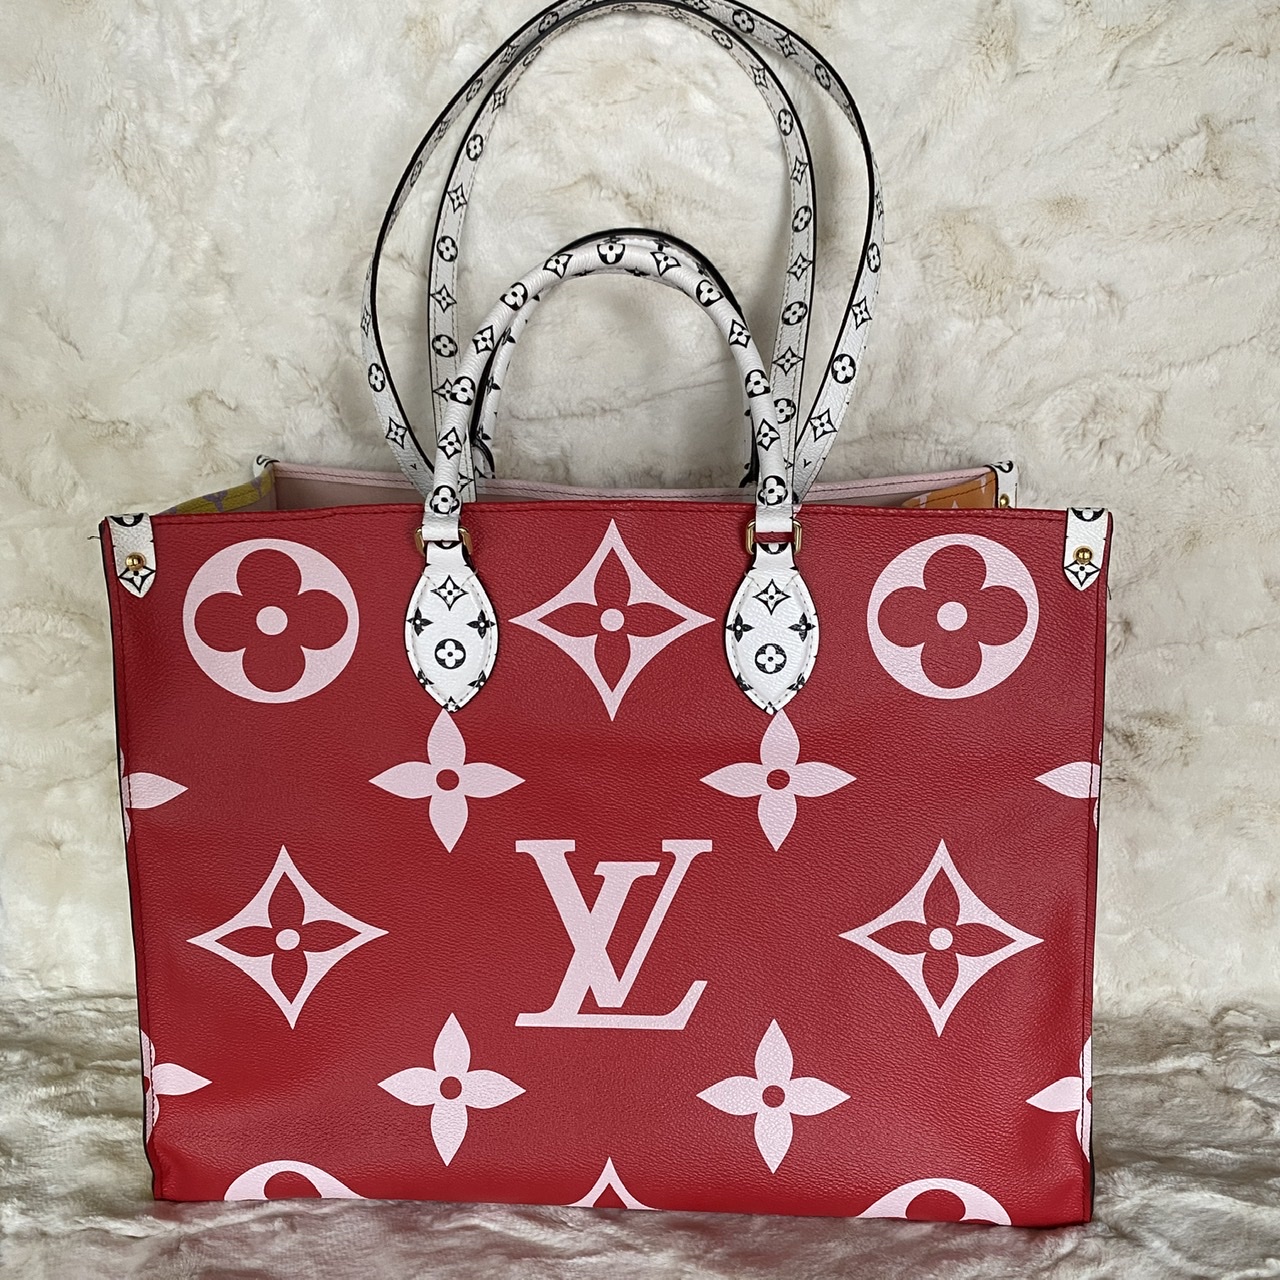 louis vuitton bags black and red